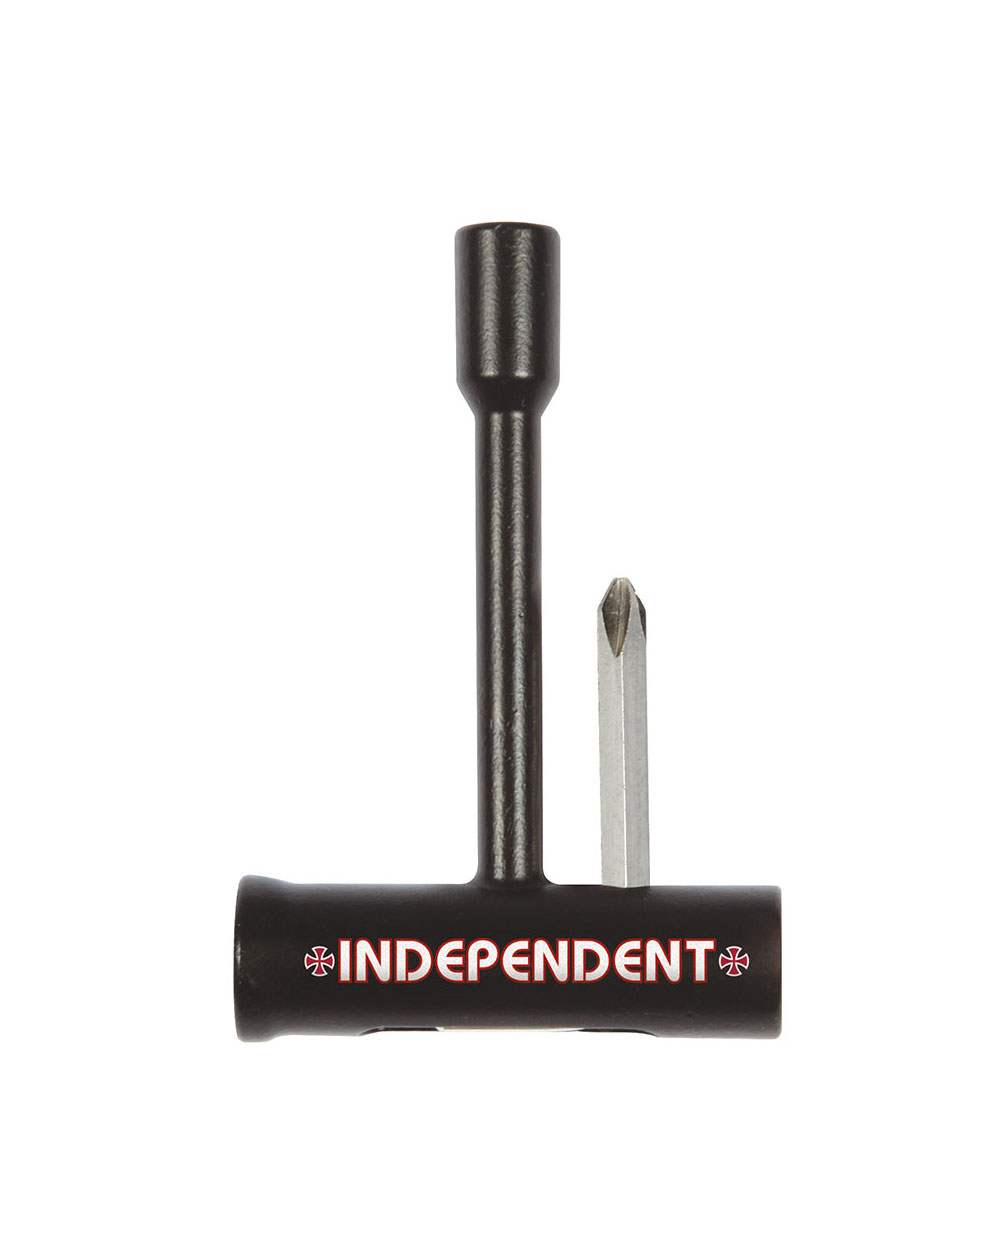 Independent Chave Skate Bearing Saver